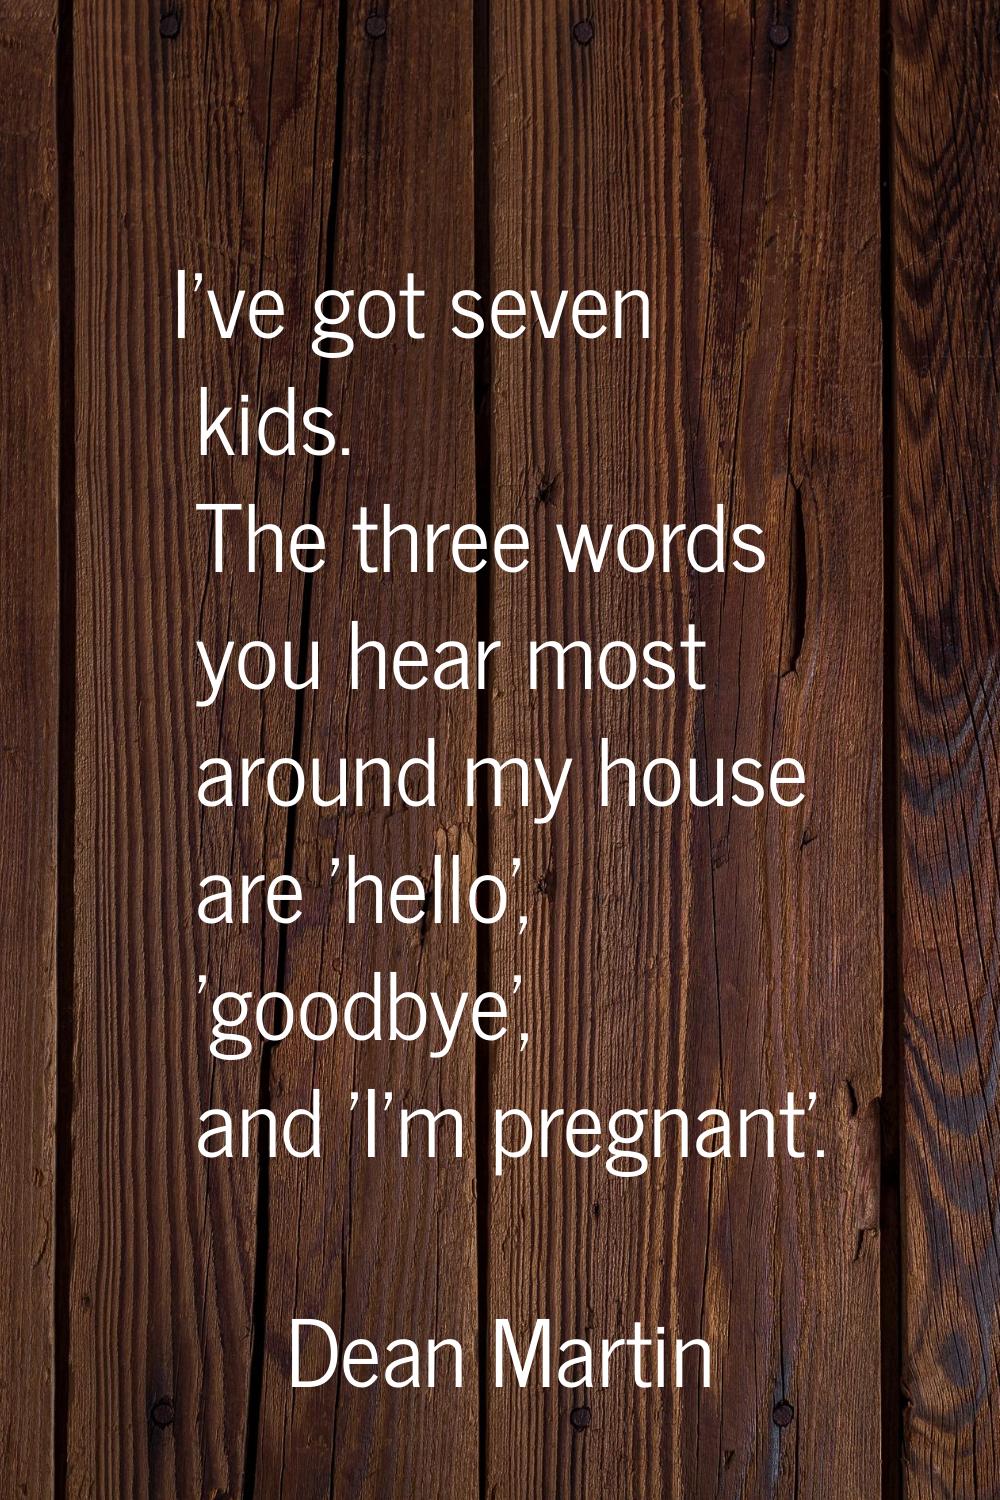 I've got seven kids. The three words you hear most around my house are 'hello', 'goodbye', and 'I'm